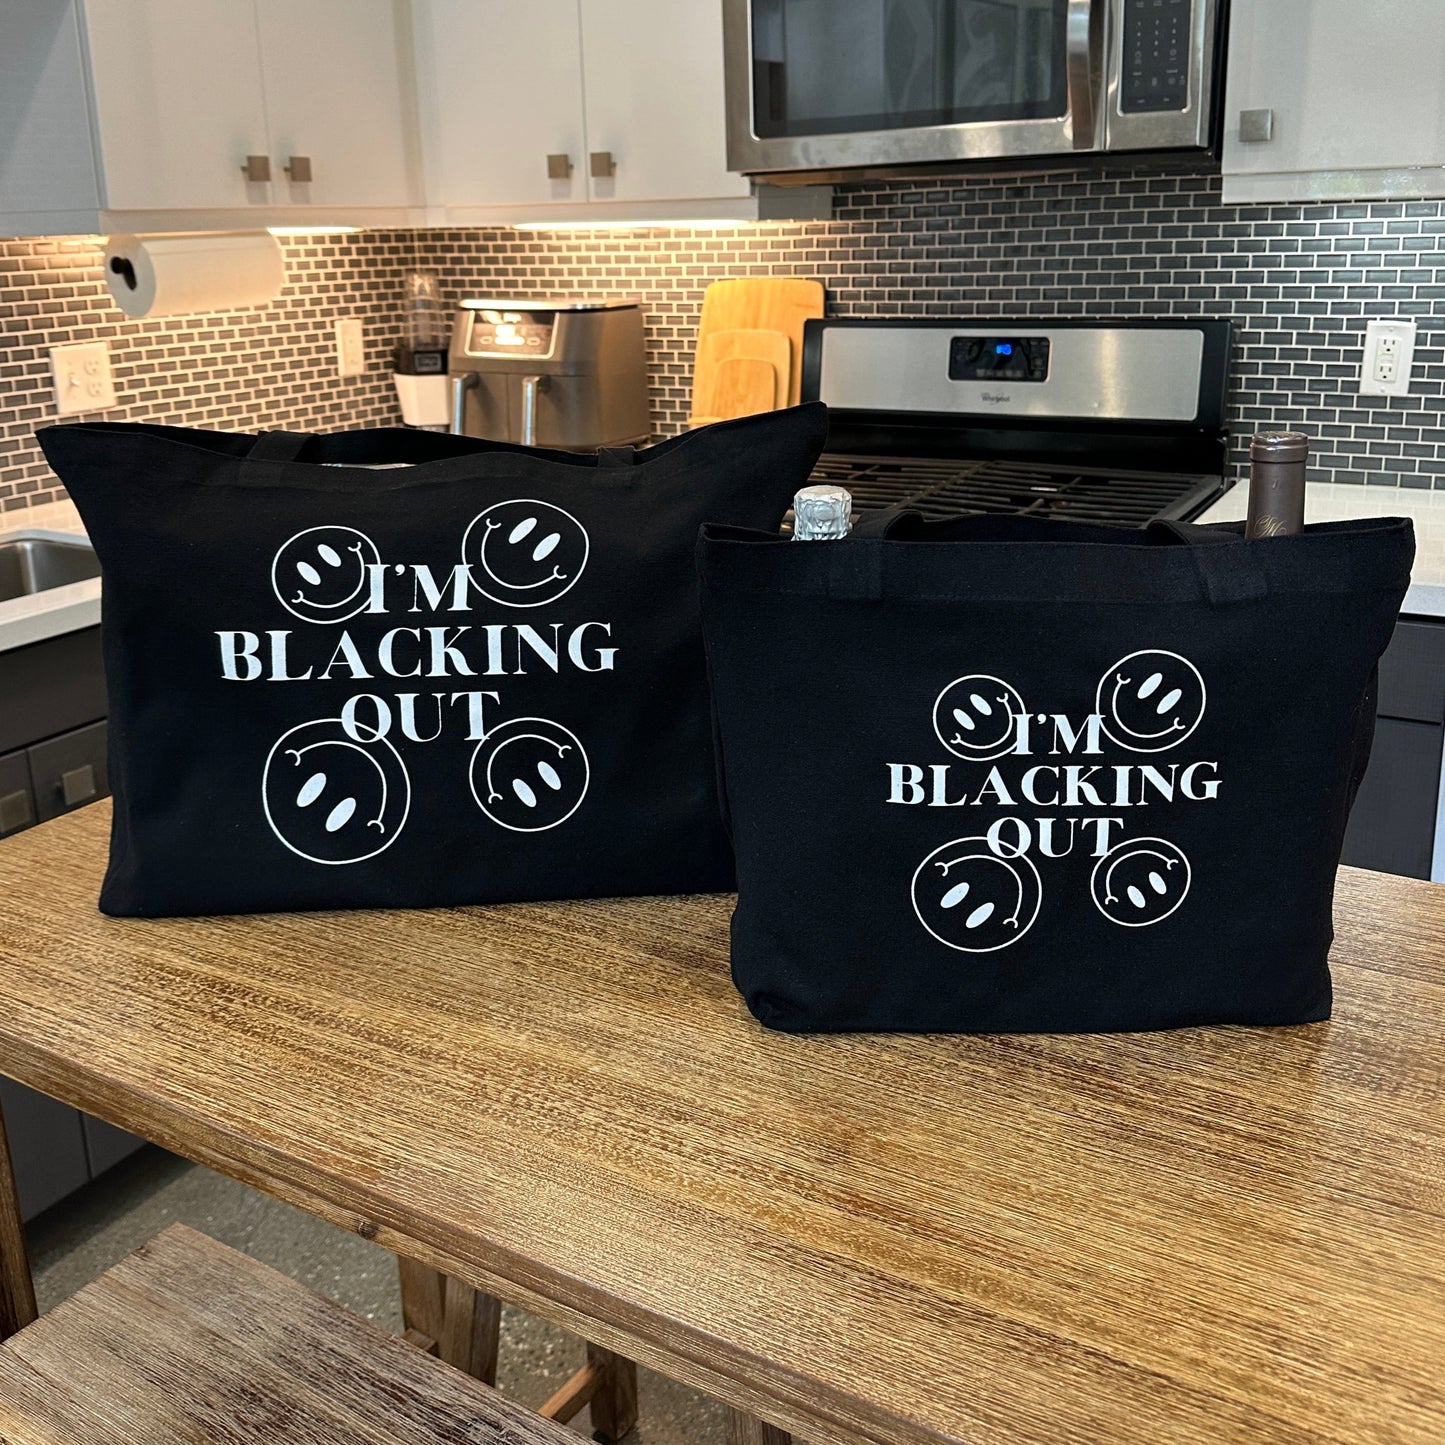 The Blacking Out Tote